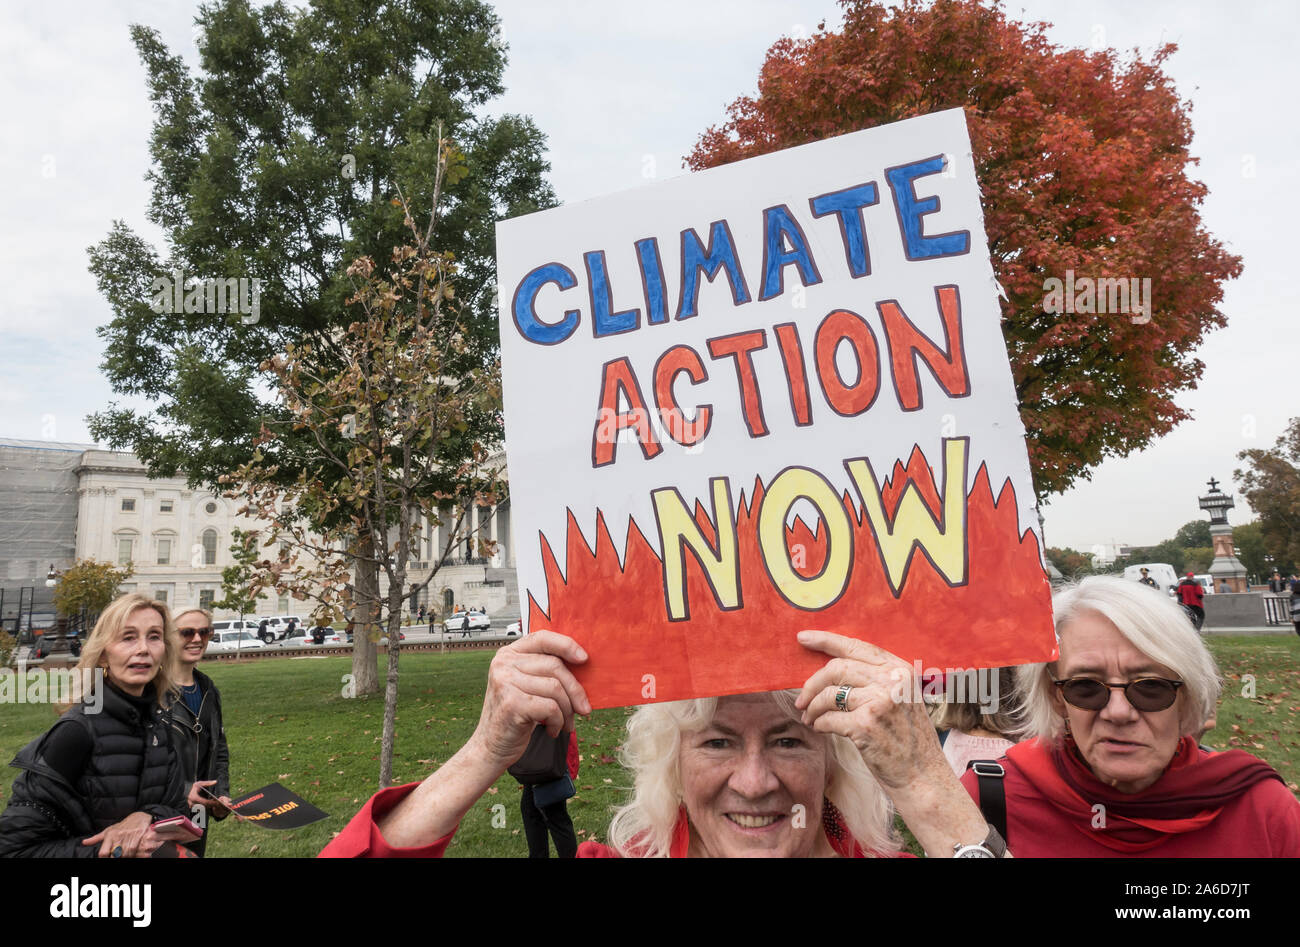 Washington, DC - Oct. 25, 2019: Participant at actress and activist Jane Fonda's ongoing Fire Drill Friday protest at the U.S. Capitol demanding government action on climate change and ending reliance on 'corrupt' fossil fuel industry. Stock Photo